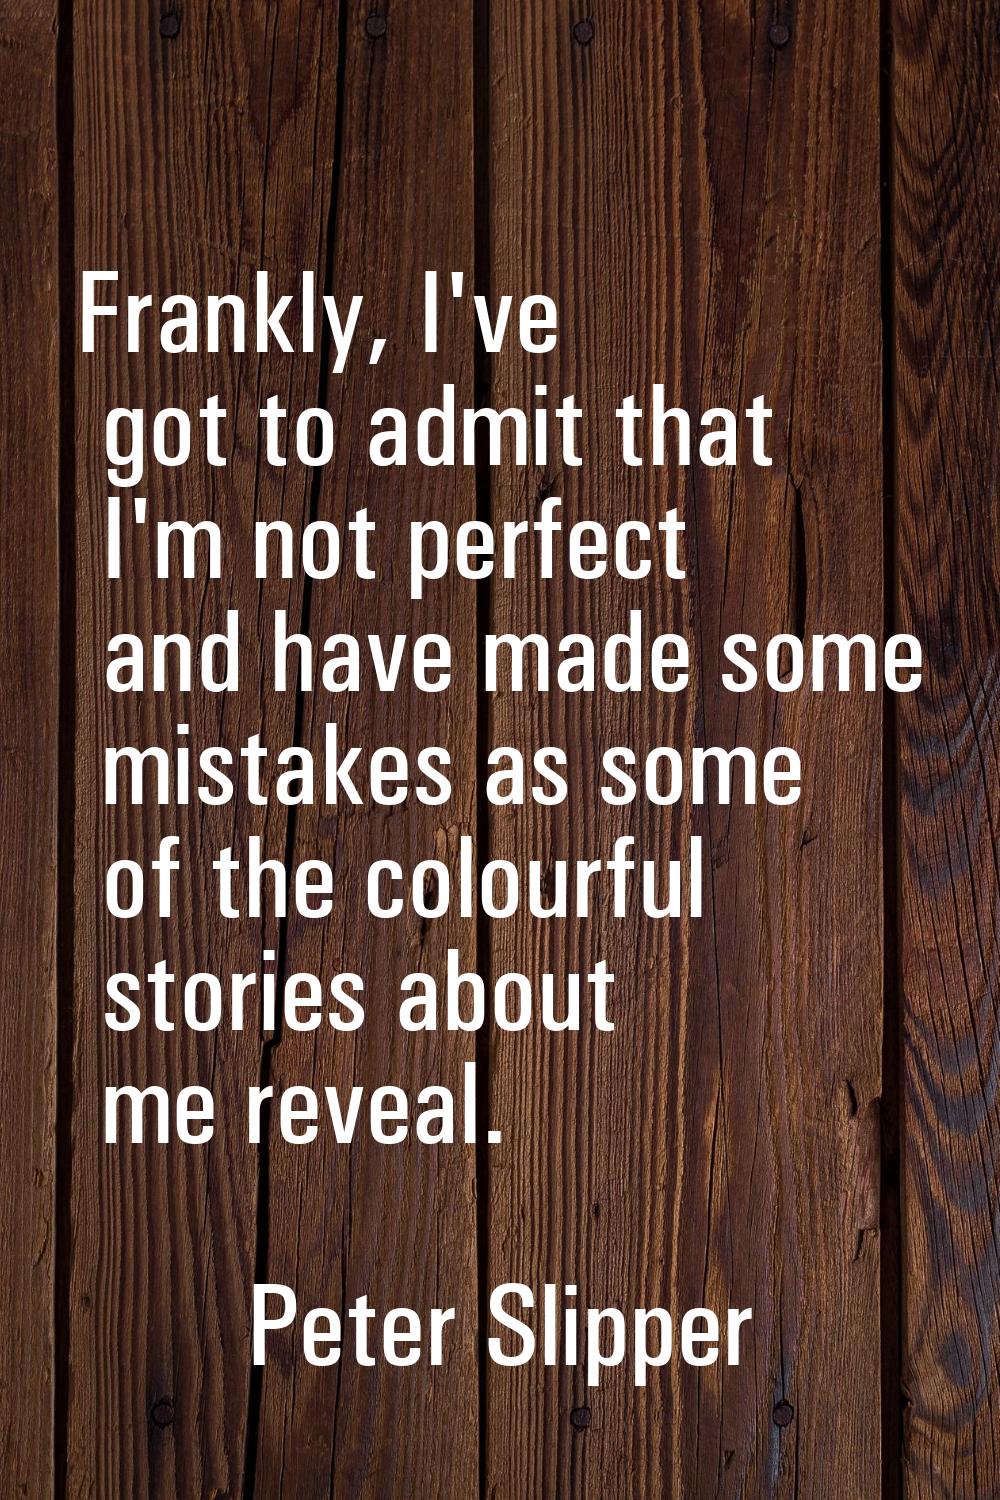 Frankly, I've got to admit that I'm not perfect and have made some mistakes as some of the colourfu